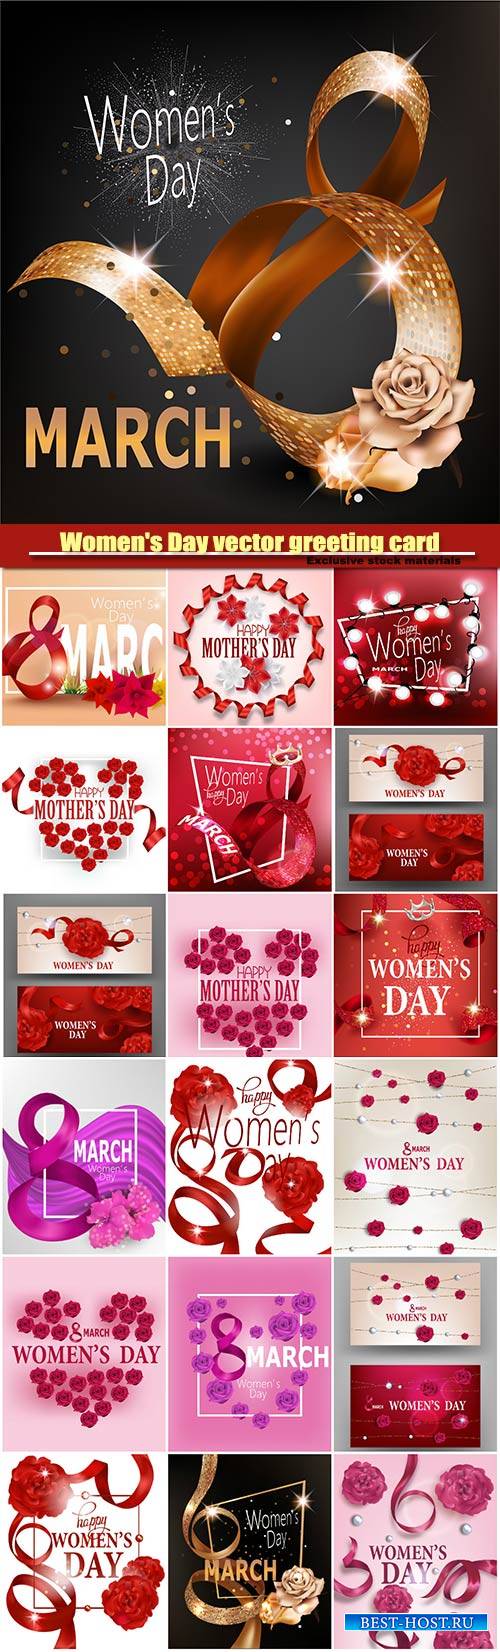 Women's Day vector greeting card with curly red ribbons and red flowers